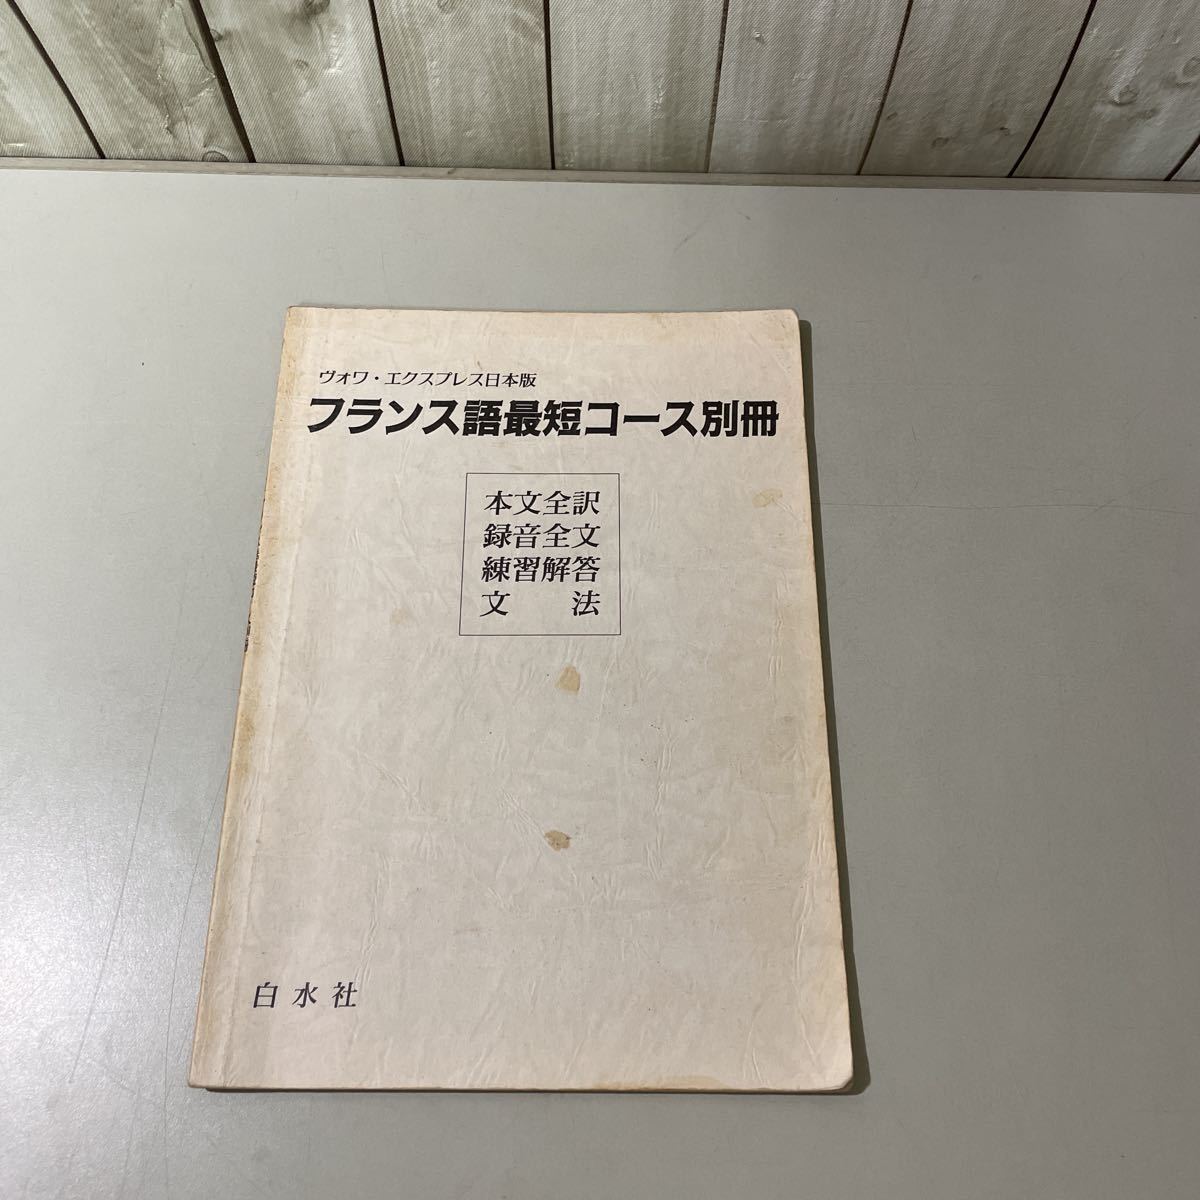 * rare! rare *. language vowa* Express Japan version French most short course CD 4 sheets + separate volume Hakusuisha / reference book / squirrel person g/ grammar / language study / text all translation *4934